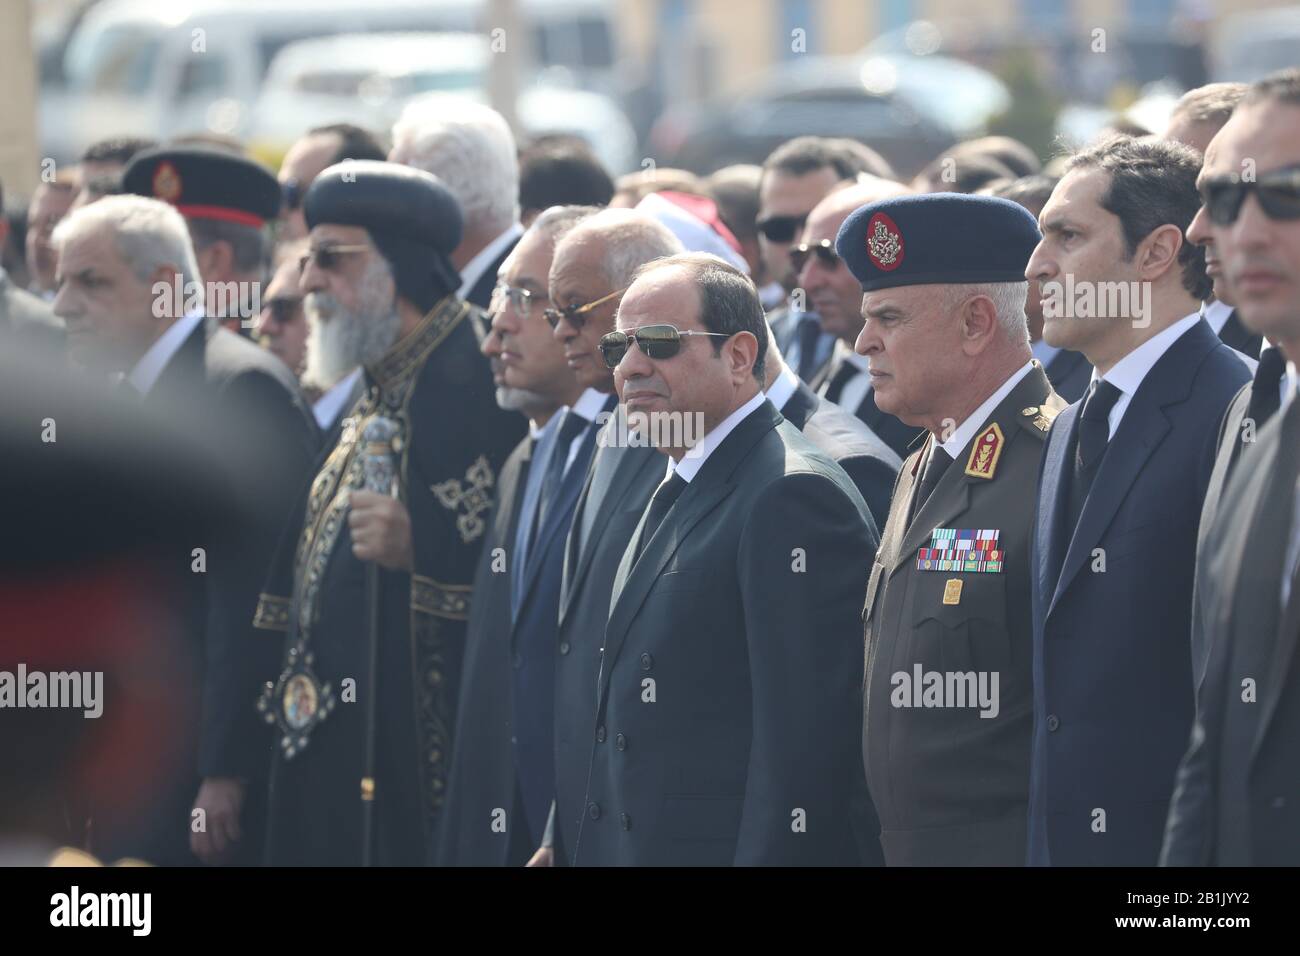 26 February 2020, Egypt, Cairo: (L-R) Former Egyptian Prime Minister Ibrahim Mahlab, Pope Tawadros II of Alexandria, Ahmad al-Tayyeb, Grand Imam of al-Azhar, Egyptian Prime Minister Mostafa Kamal Madbouly, Speaker of the Egyptian House of Representatives Ali Abdel Aal Egyptian President Abdel Fattah el-Sisi, Chief of Staff of the Armed Forces Lieutenant General Mohamed Farid Hegazy and Alaa Mubarak elder son of former Egyptian President Hosni Mubarak, take part in Mubarak's military funeral at El-Mosheer Tantawy mosque. Mubarak, who ruled Egypt for three decades, died on Tuesday in a Stock Photo